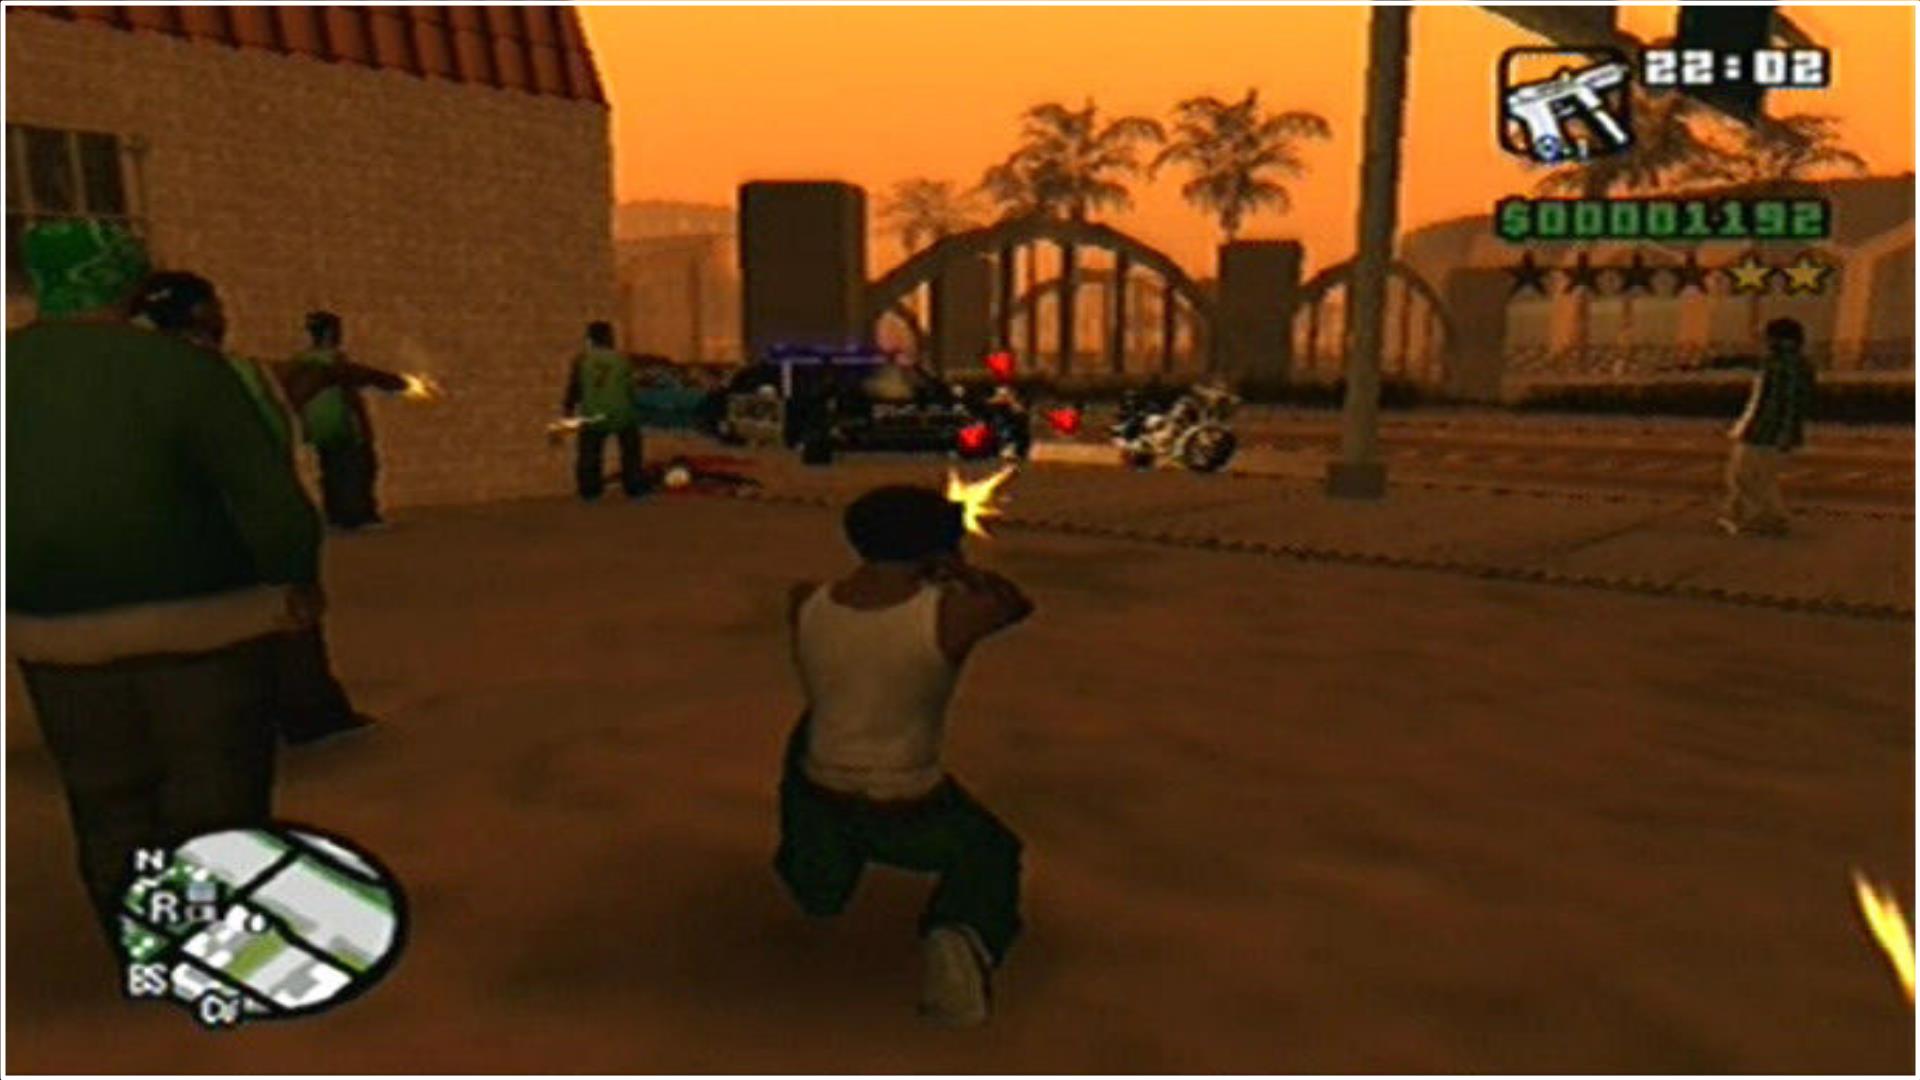 Grand Theft Auto - San Andreas (USA) Sony PlayStation 2 (PS2) ISO Download  - RomUlation